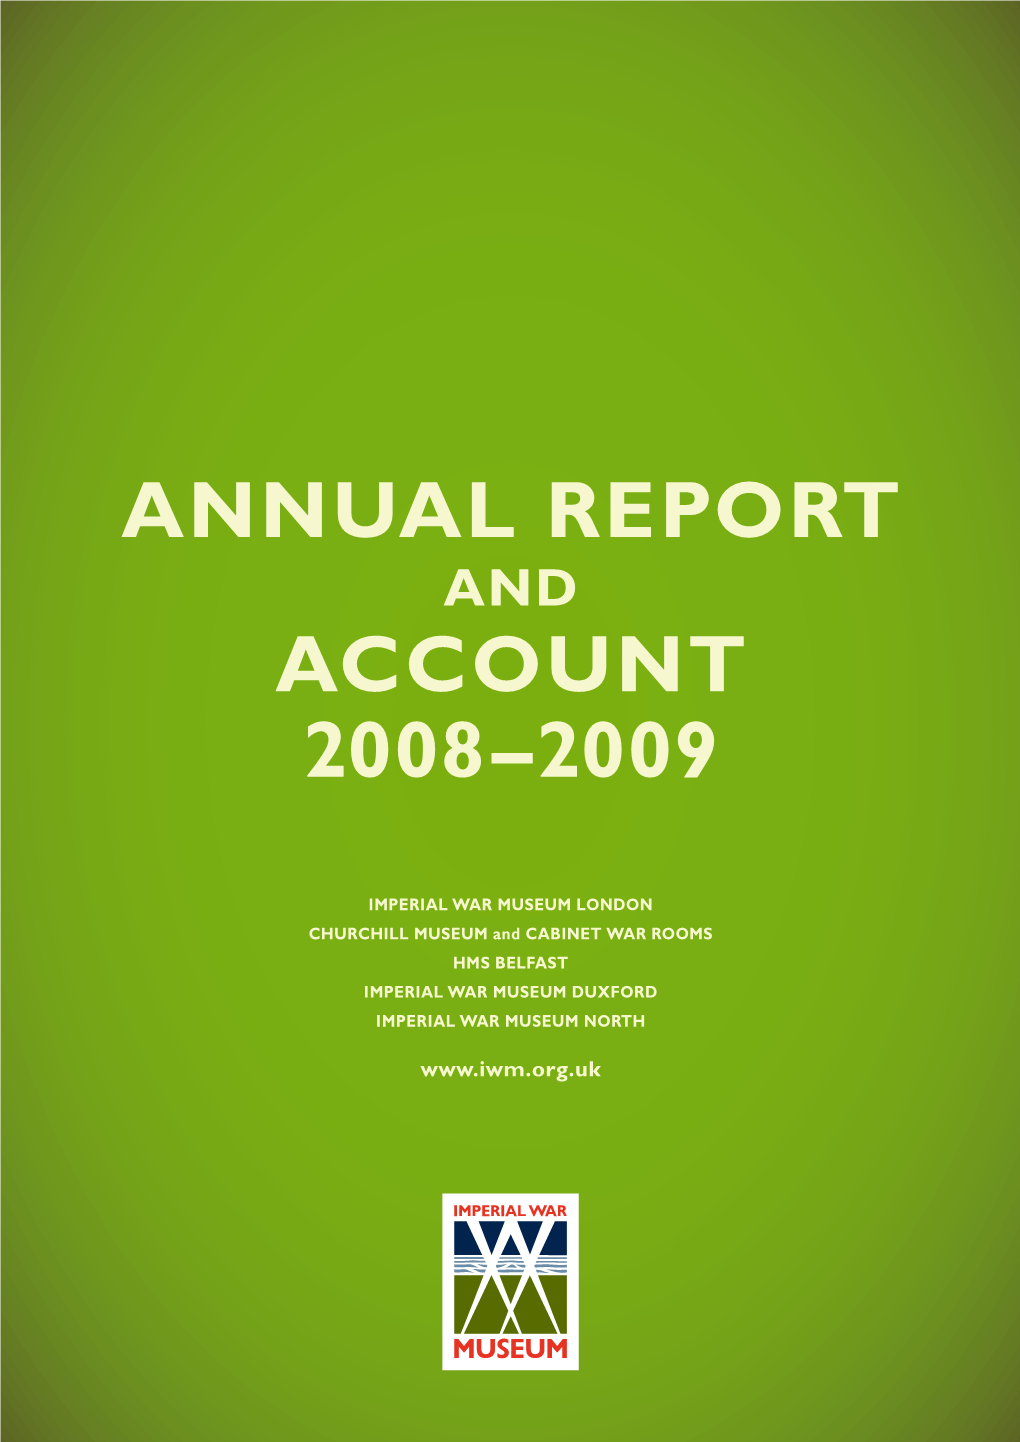 Imperial War Museum Annual Report and Account 2008-2009